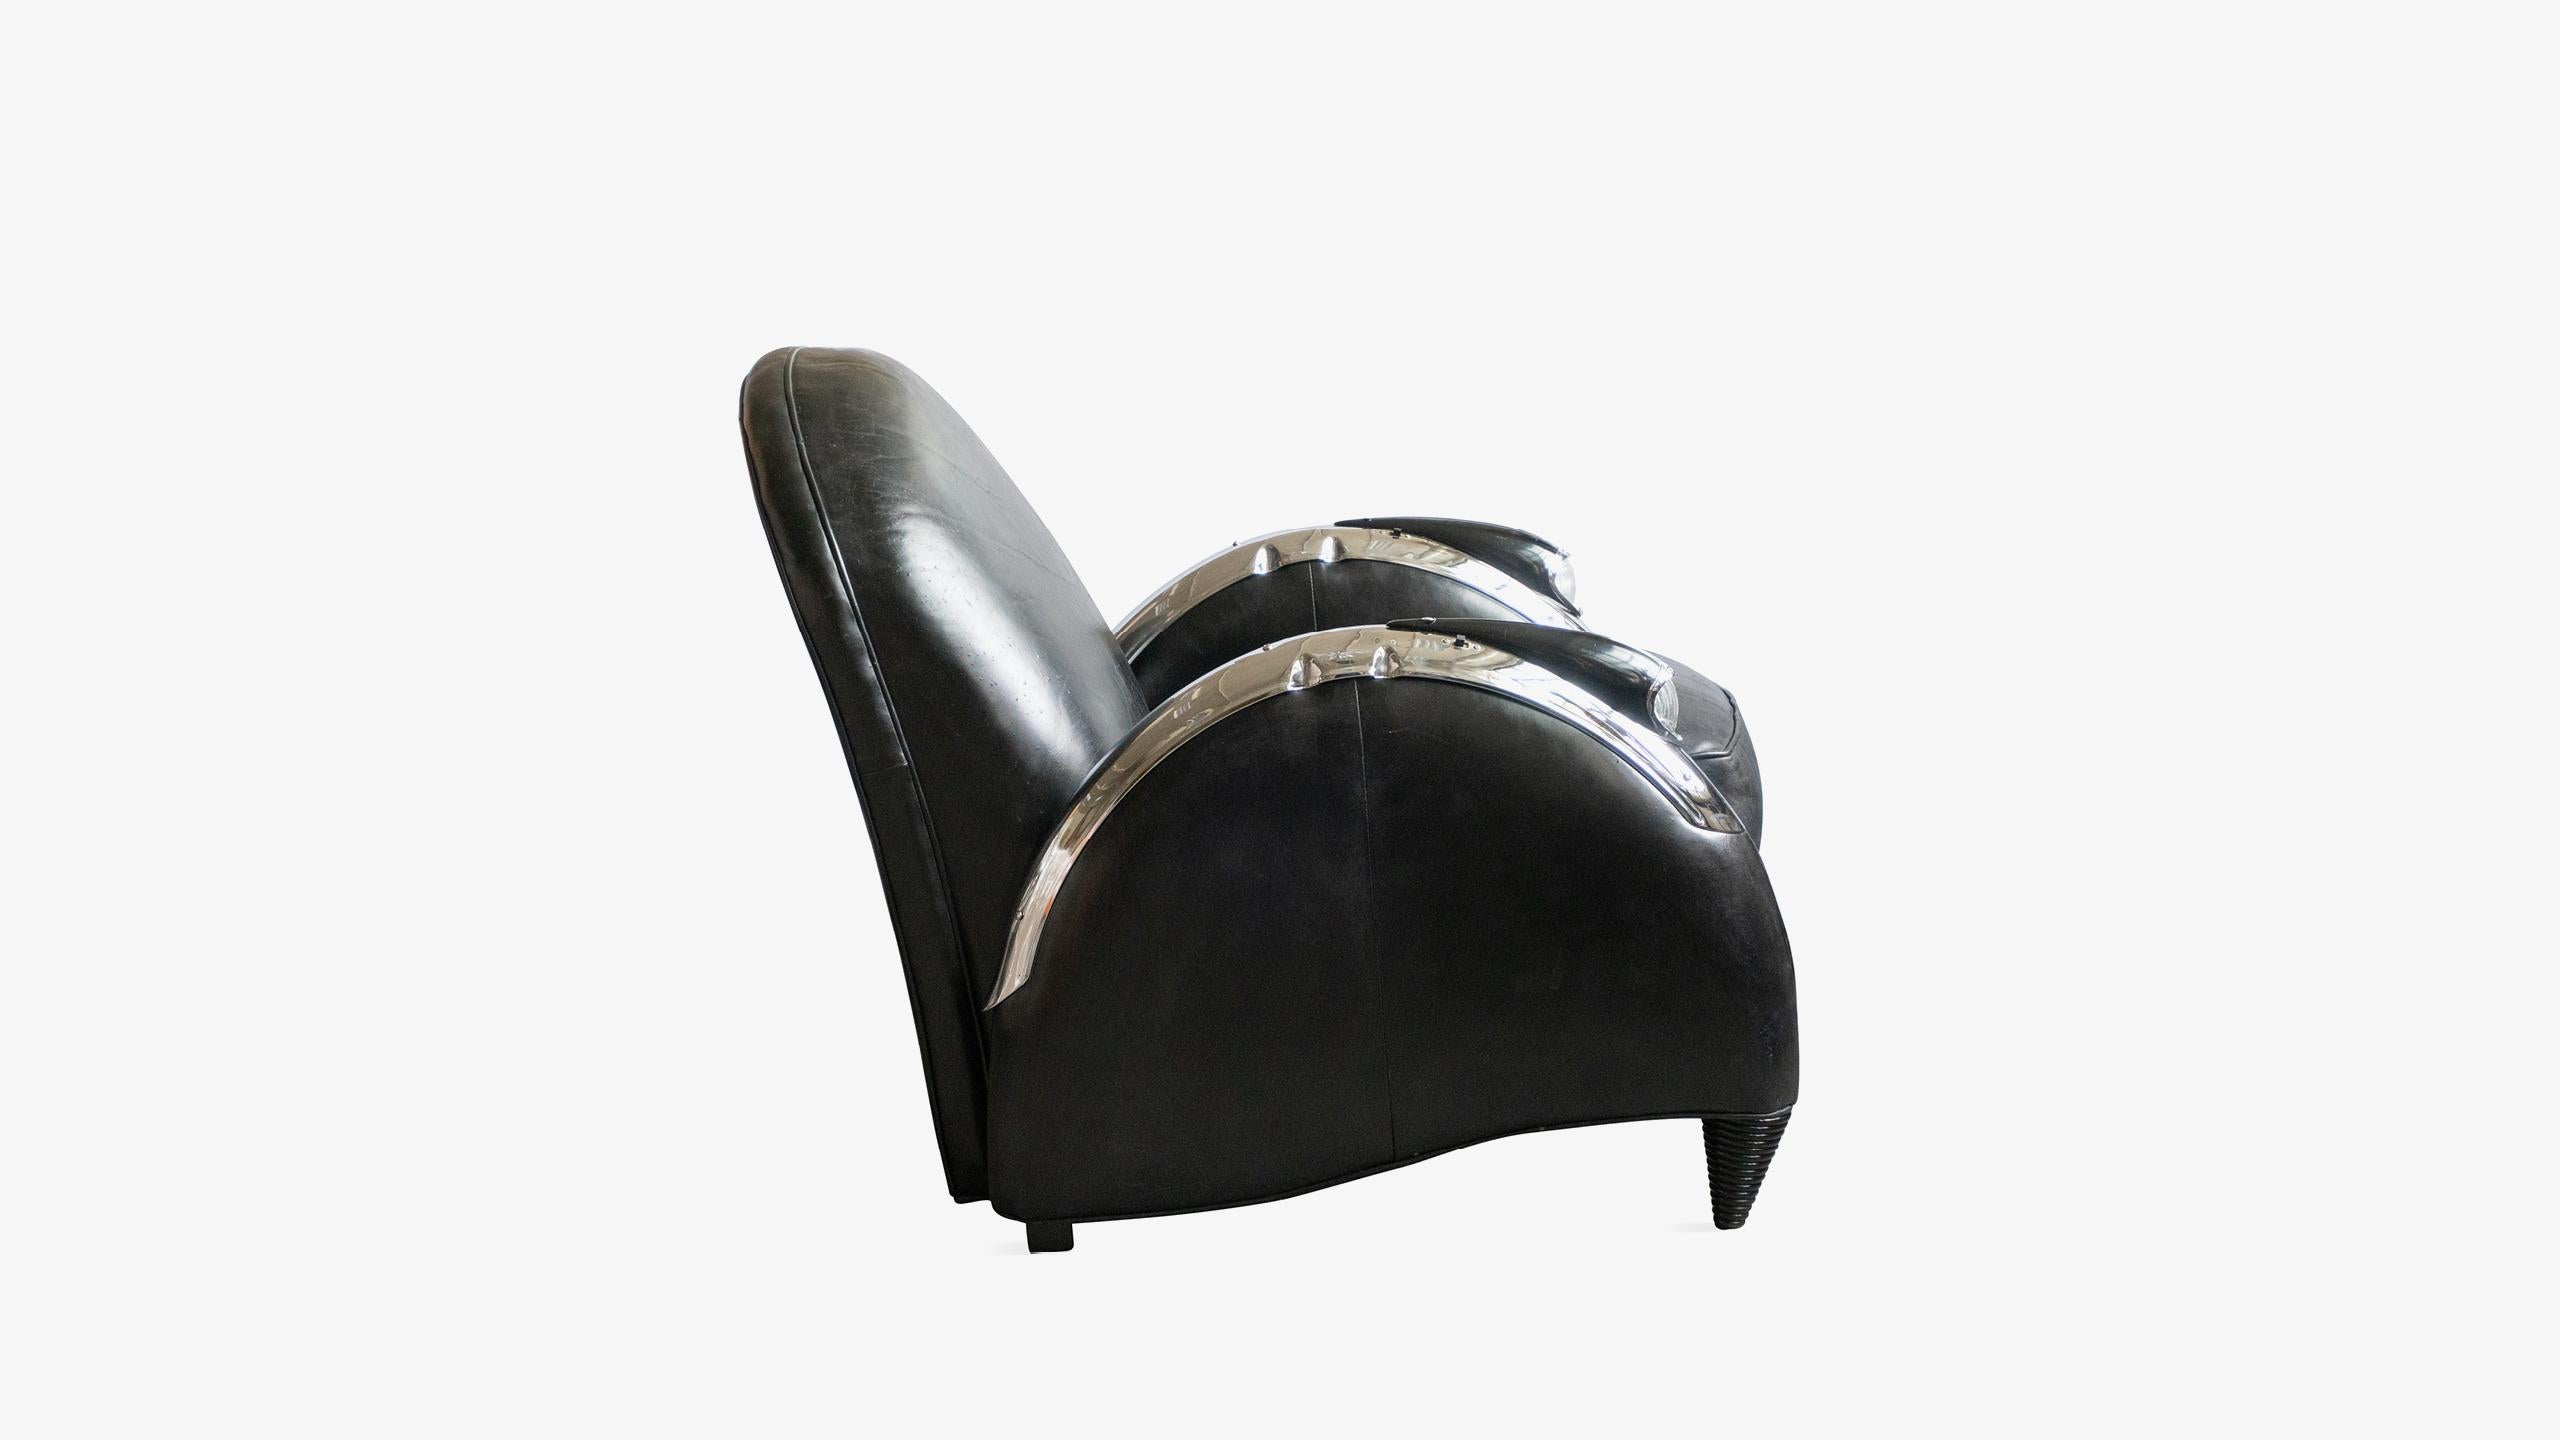 Known for a streamlined sleek aesthetic, Art Deco design remains relevant to this day. The style borrows Bauhaus geometry and accentuates it with decorative materials such as crisp metals and supple upholstery. This chair was designed with all of